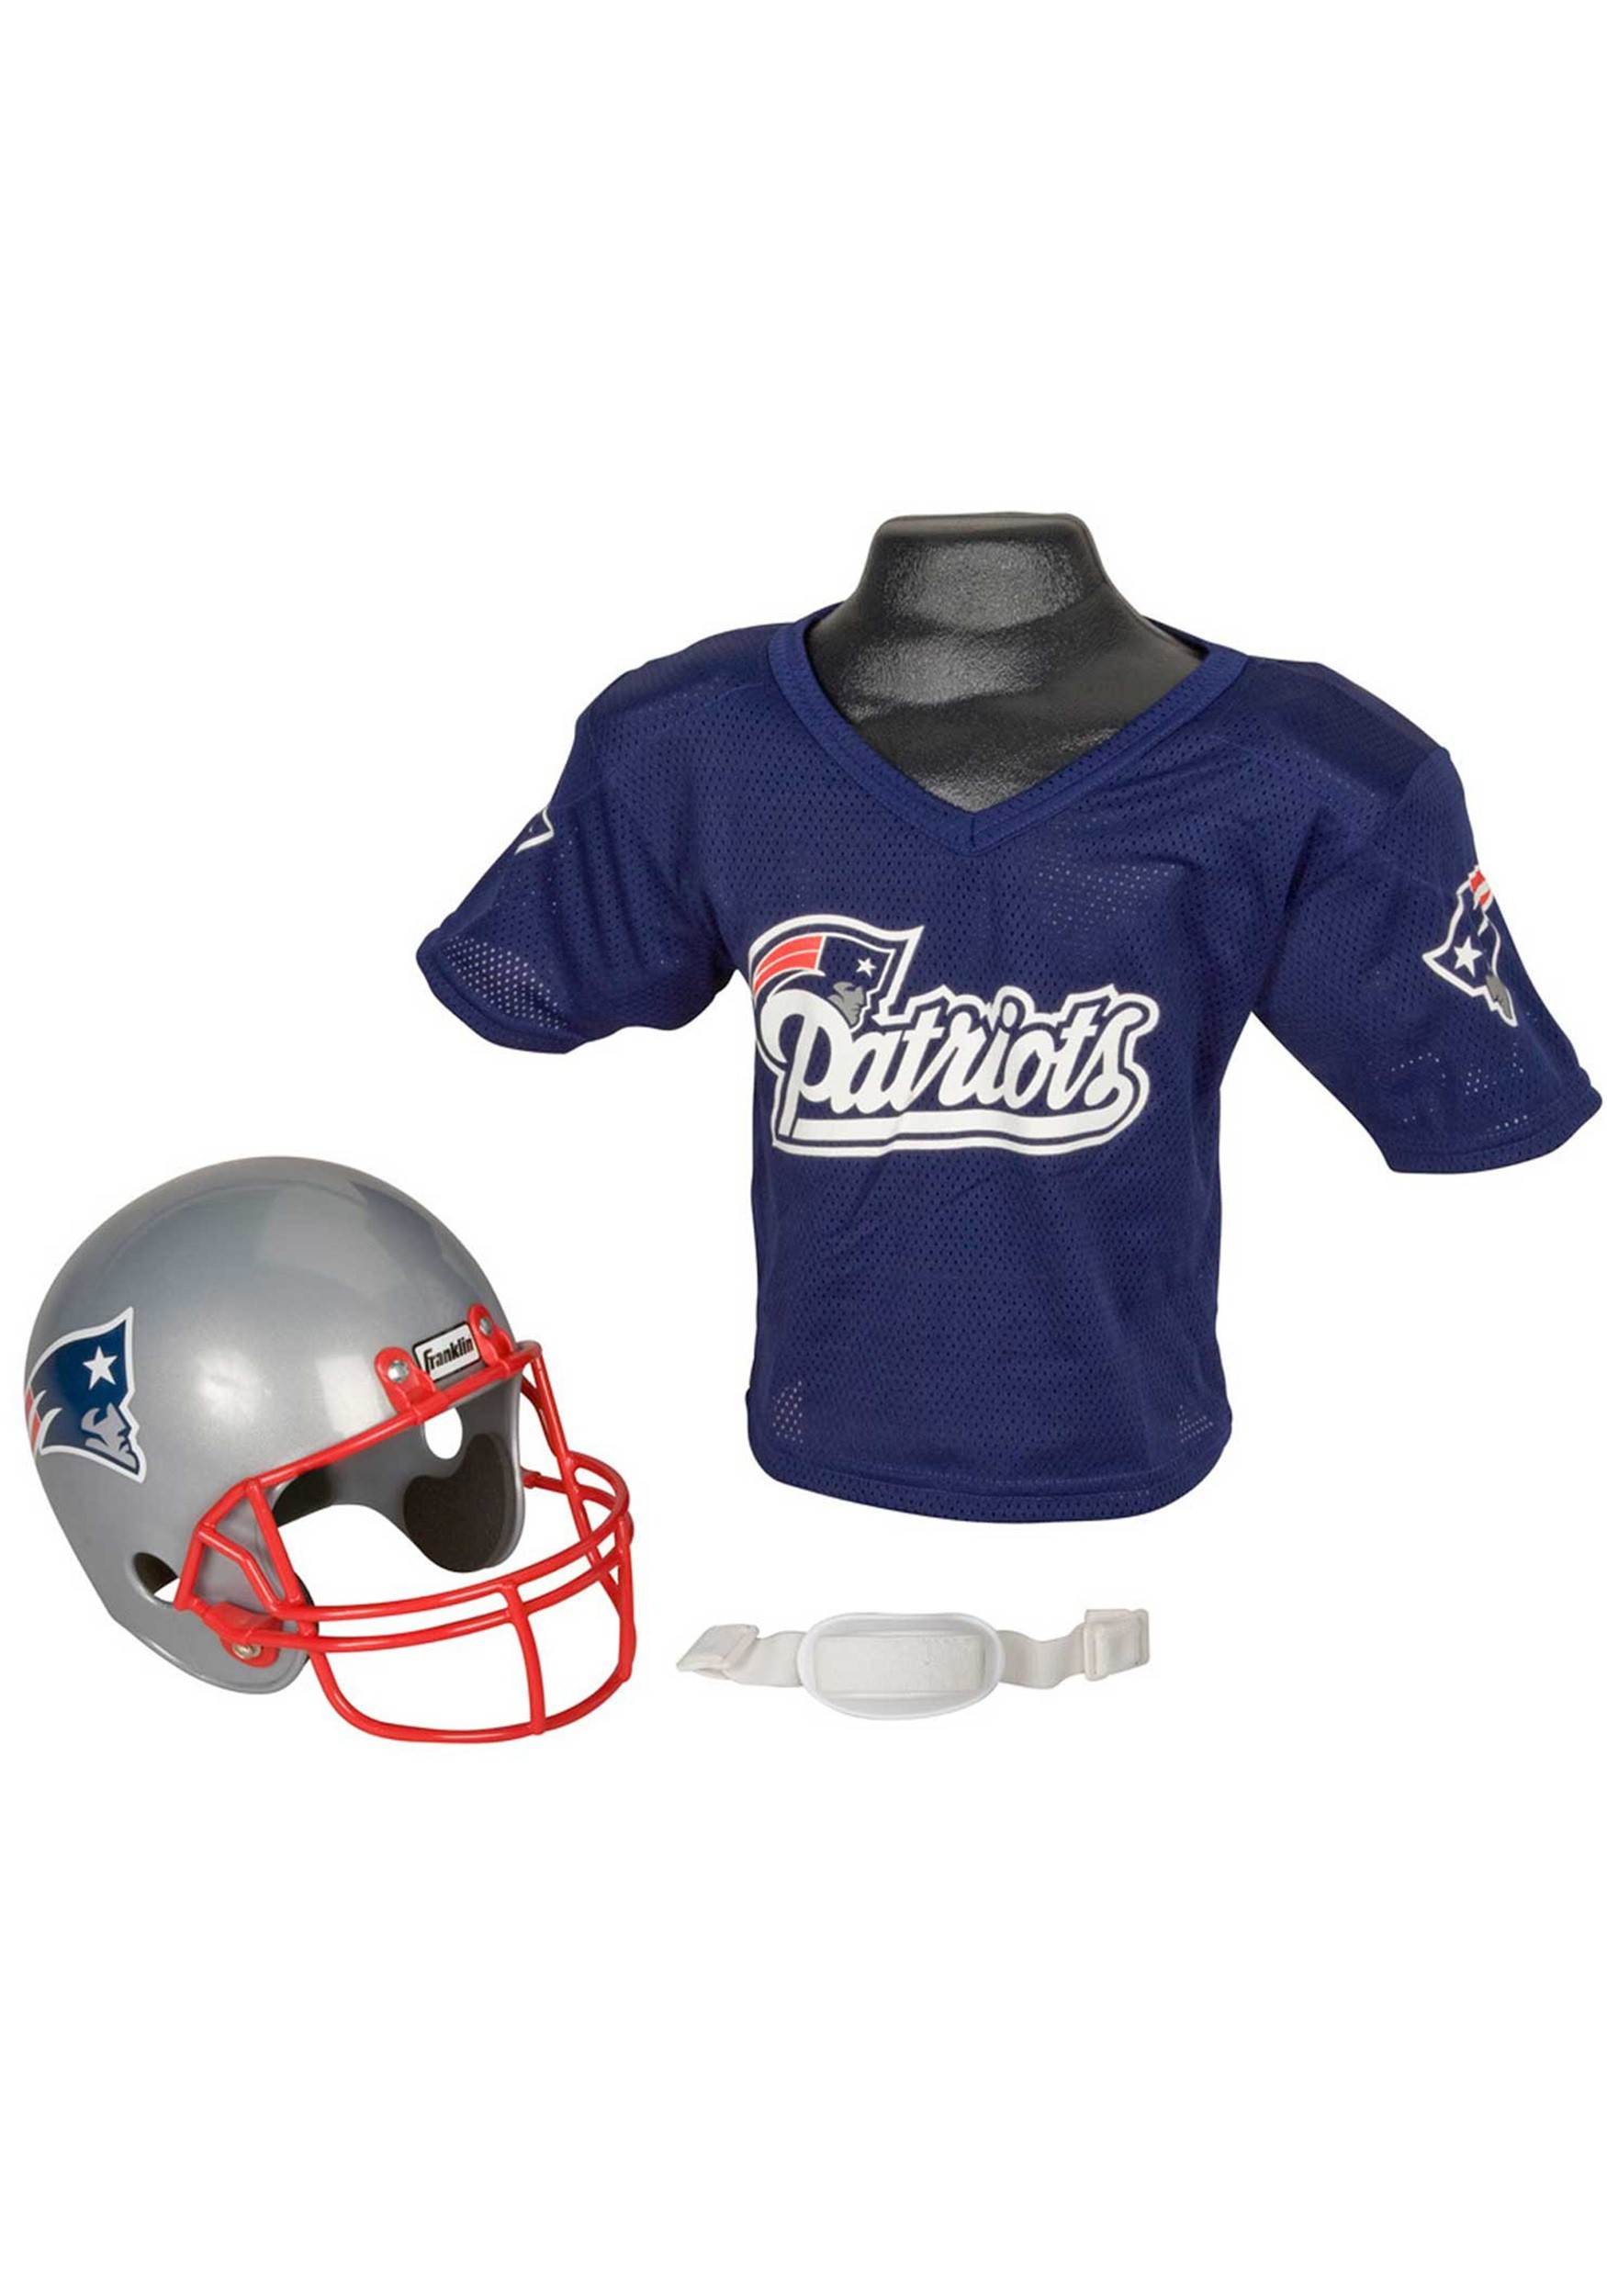 nfl youth helmet and jersey set